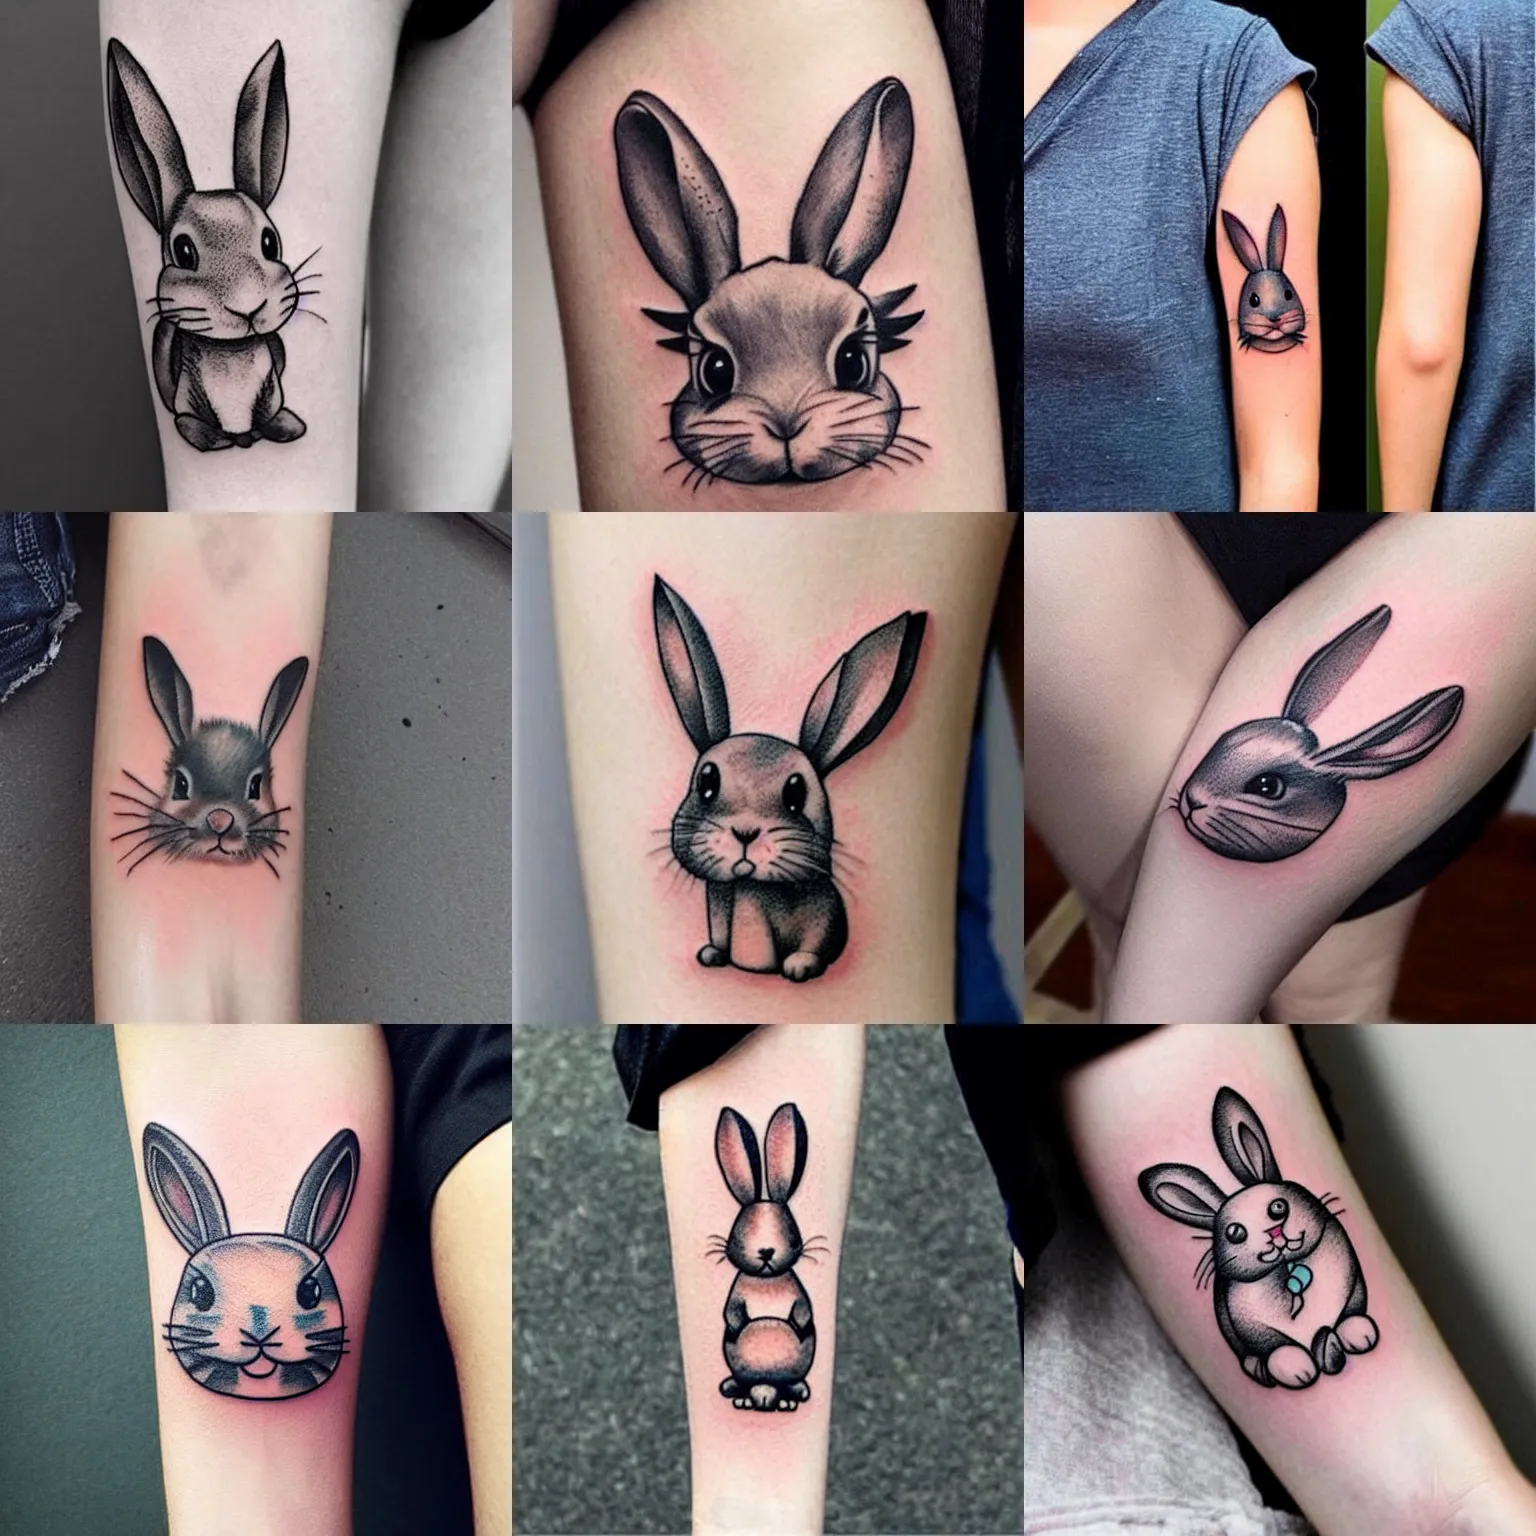 Checkout This Cute Bunny Tattoo For Women- Inspiring Men/Women At Aliens  Tattoo(Small & Cute Tattoo) | Rabbit tattoos, Bunny tattoos, Small tattoos